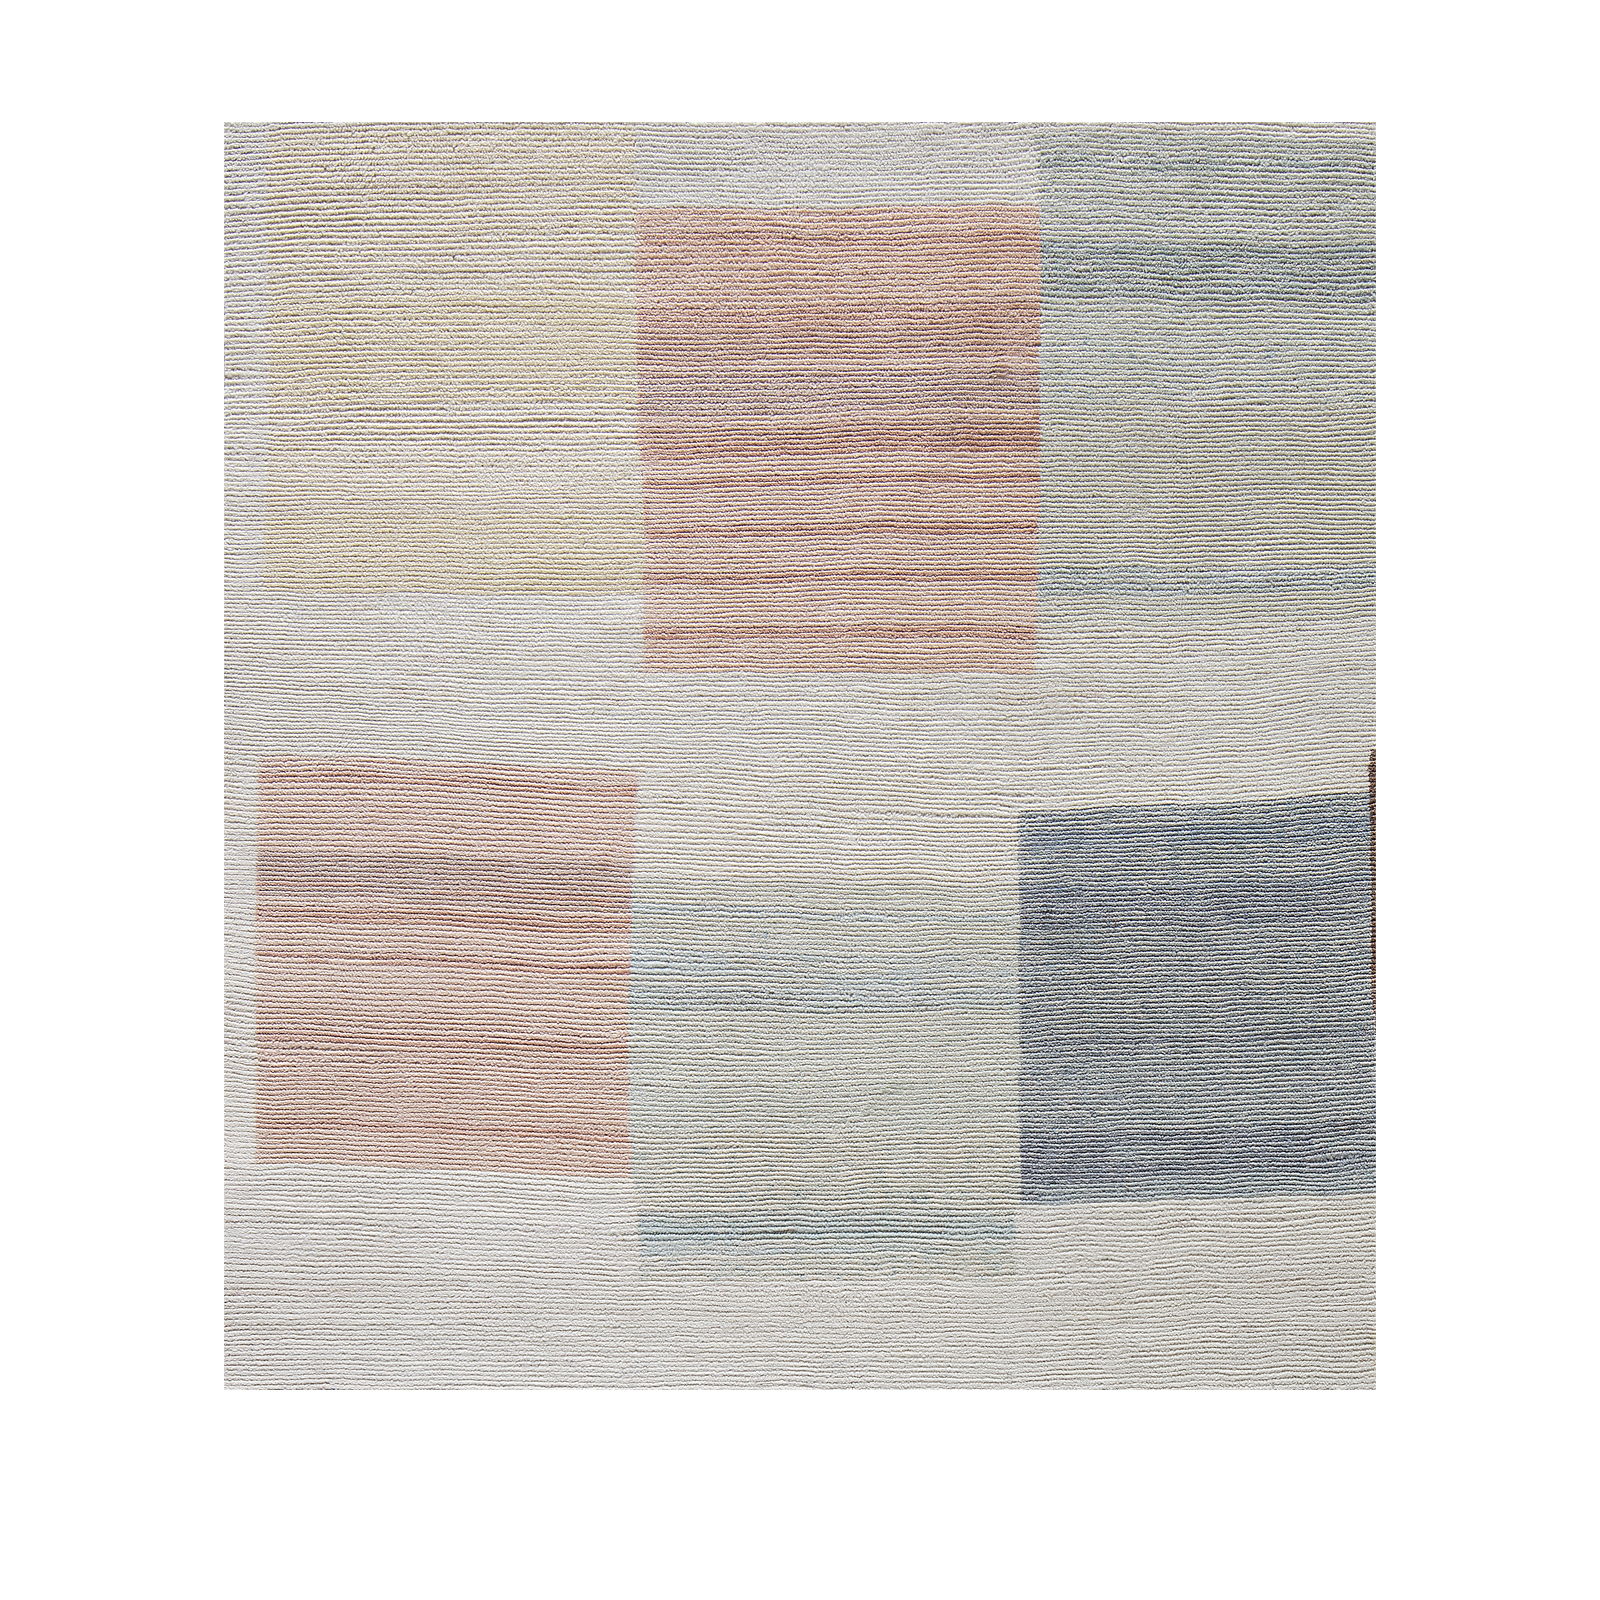 This Offset rug is hand-knotted and made of 100% wool. 